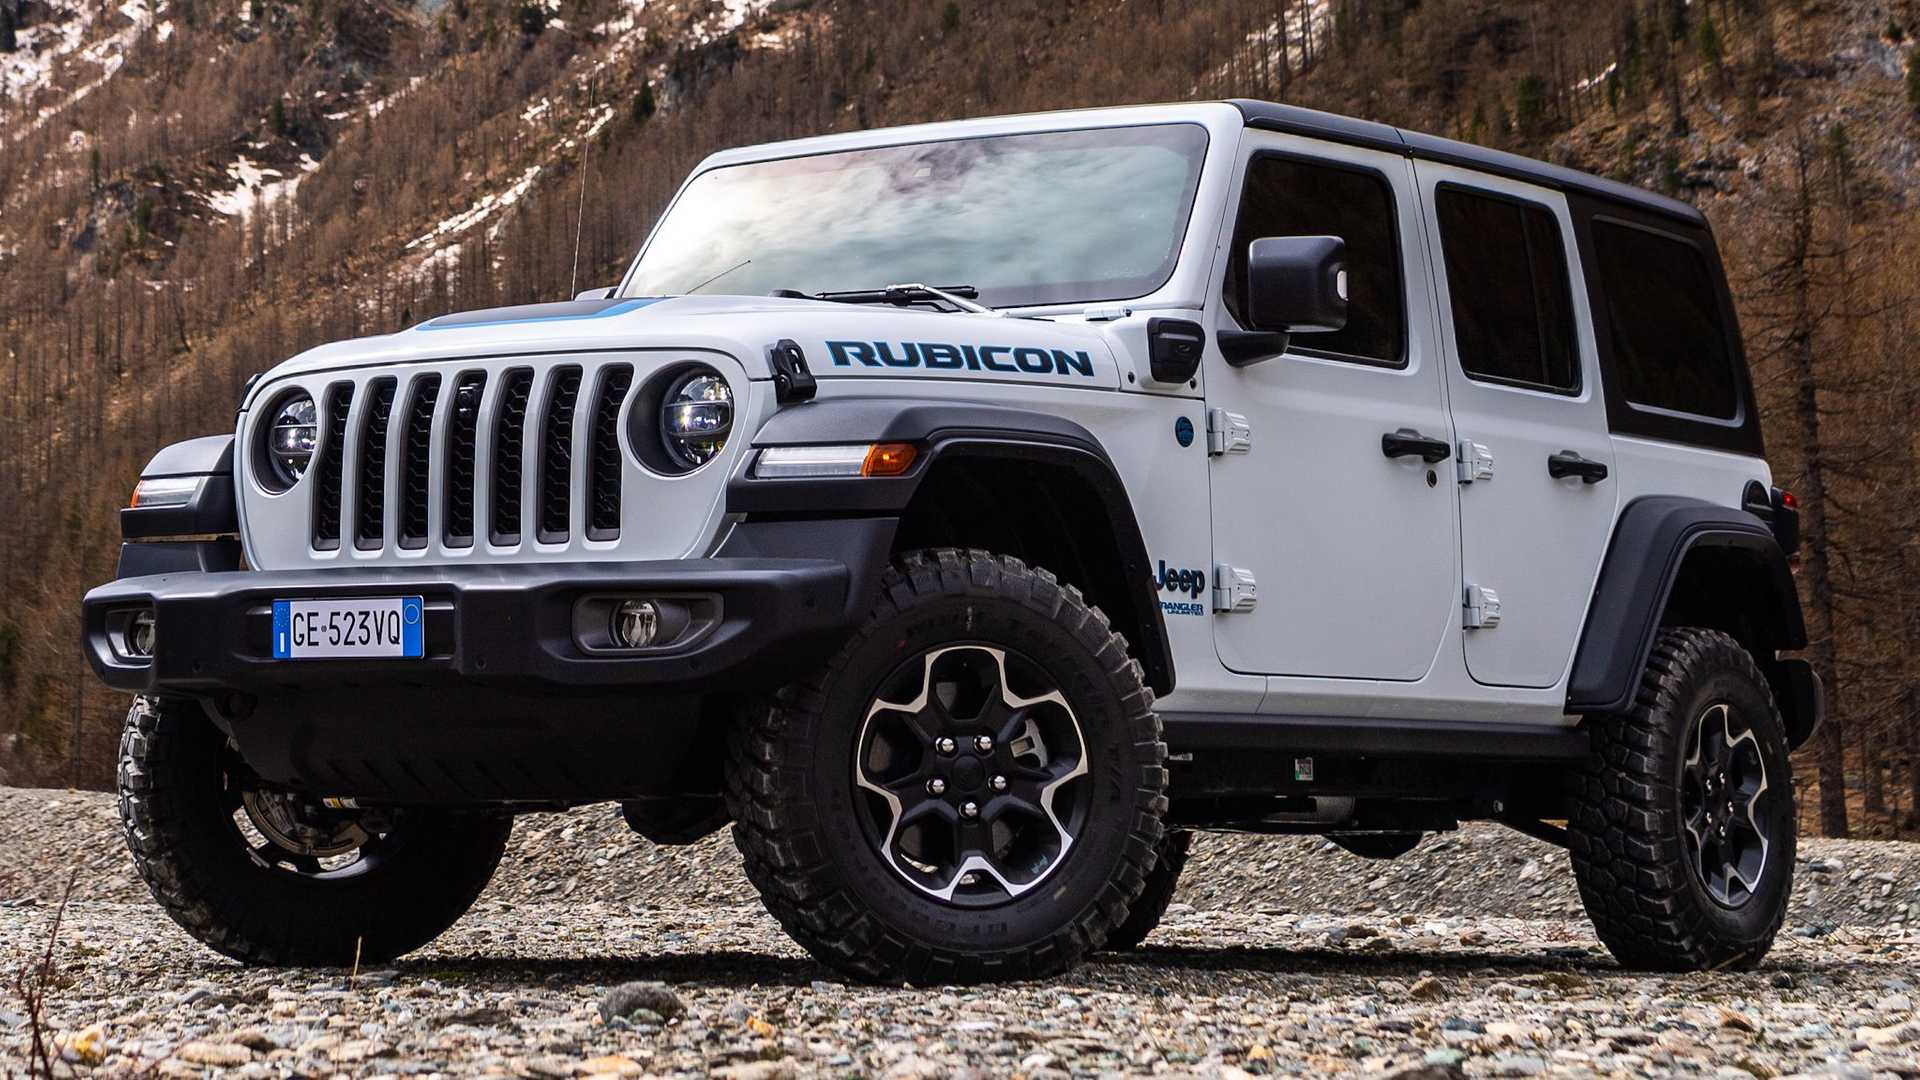 Jeep Wrangler Rubicon front angular in them mountains